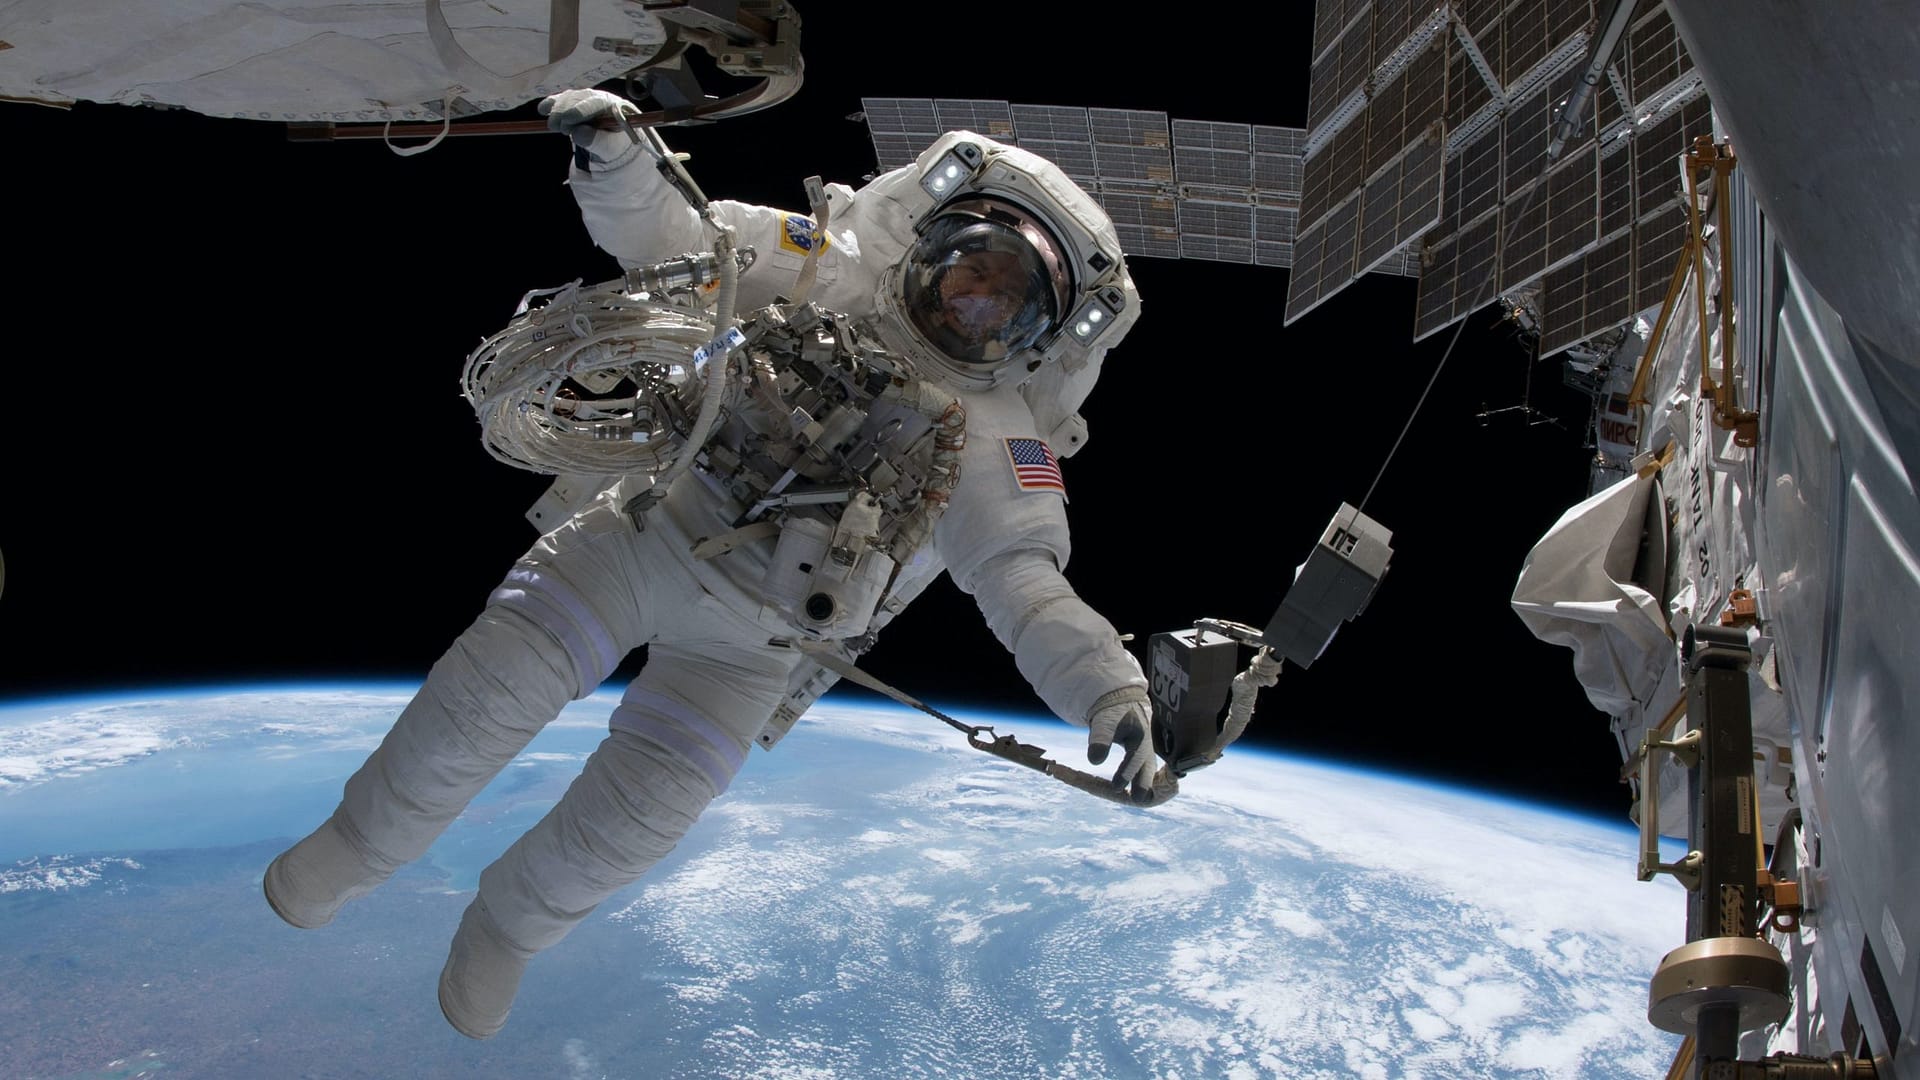 Image: Astronaut on a spacewalk outside of the international space station (ISS)